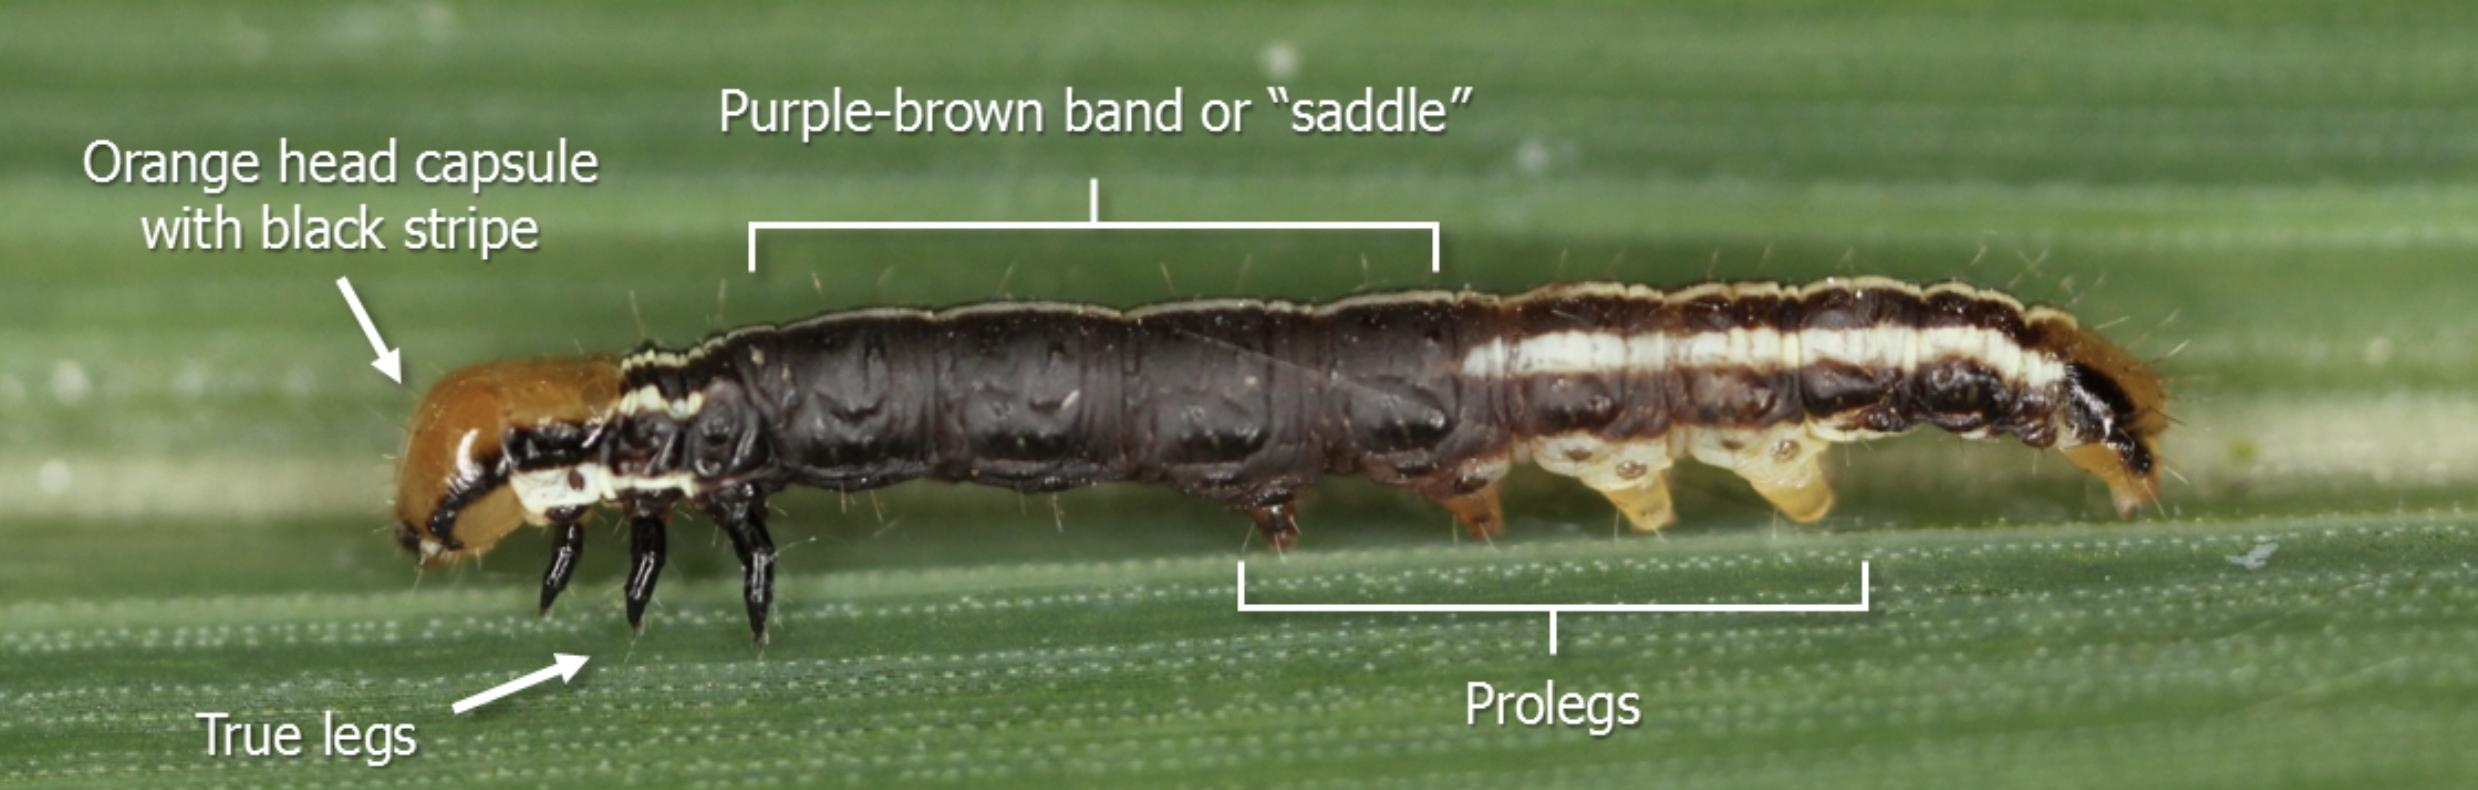 Caterpillar on a corn leaf with an orange head capsule with a black strip, three black true legs behind the head, a purple-brown band, or saddle in its middle, and four sets of prolegs near its back side.